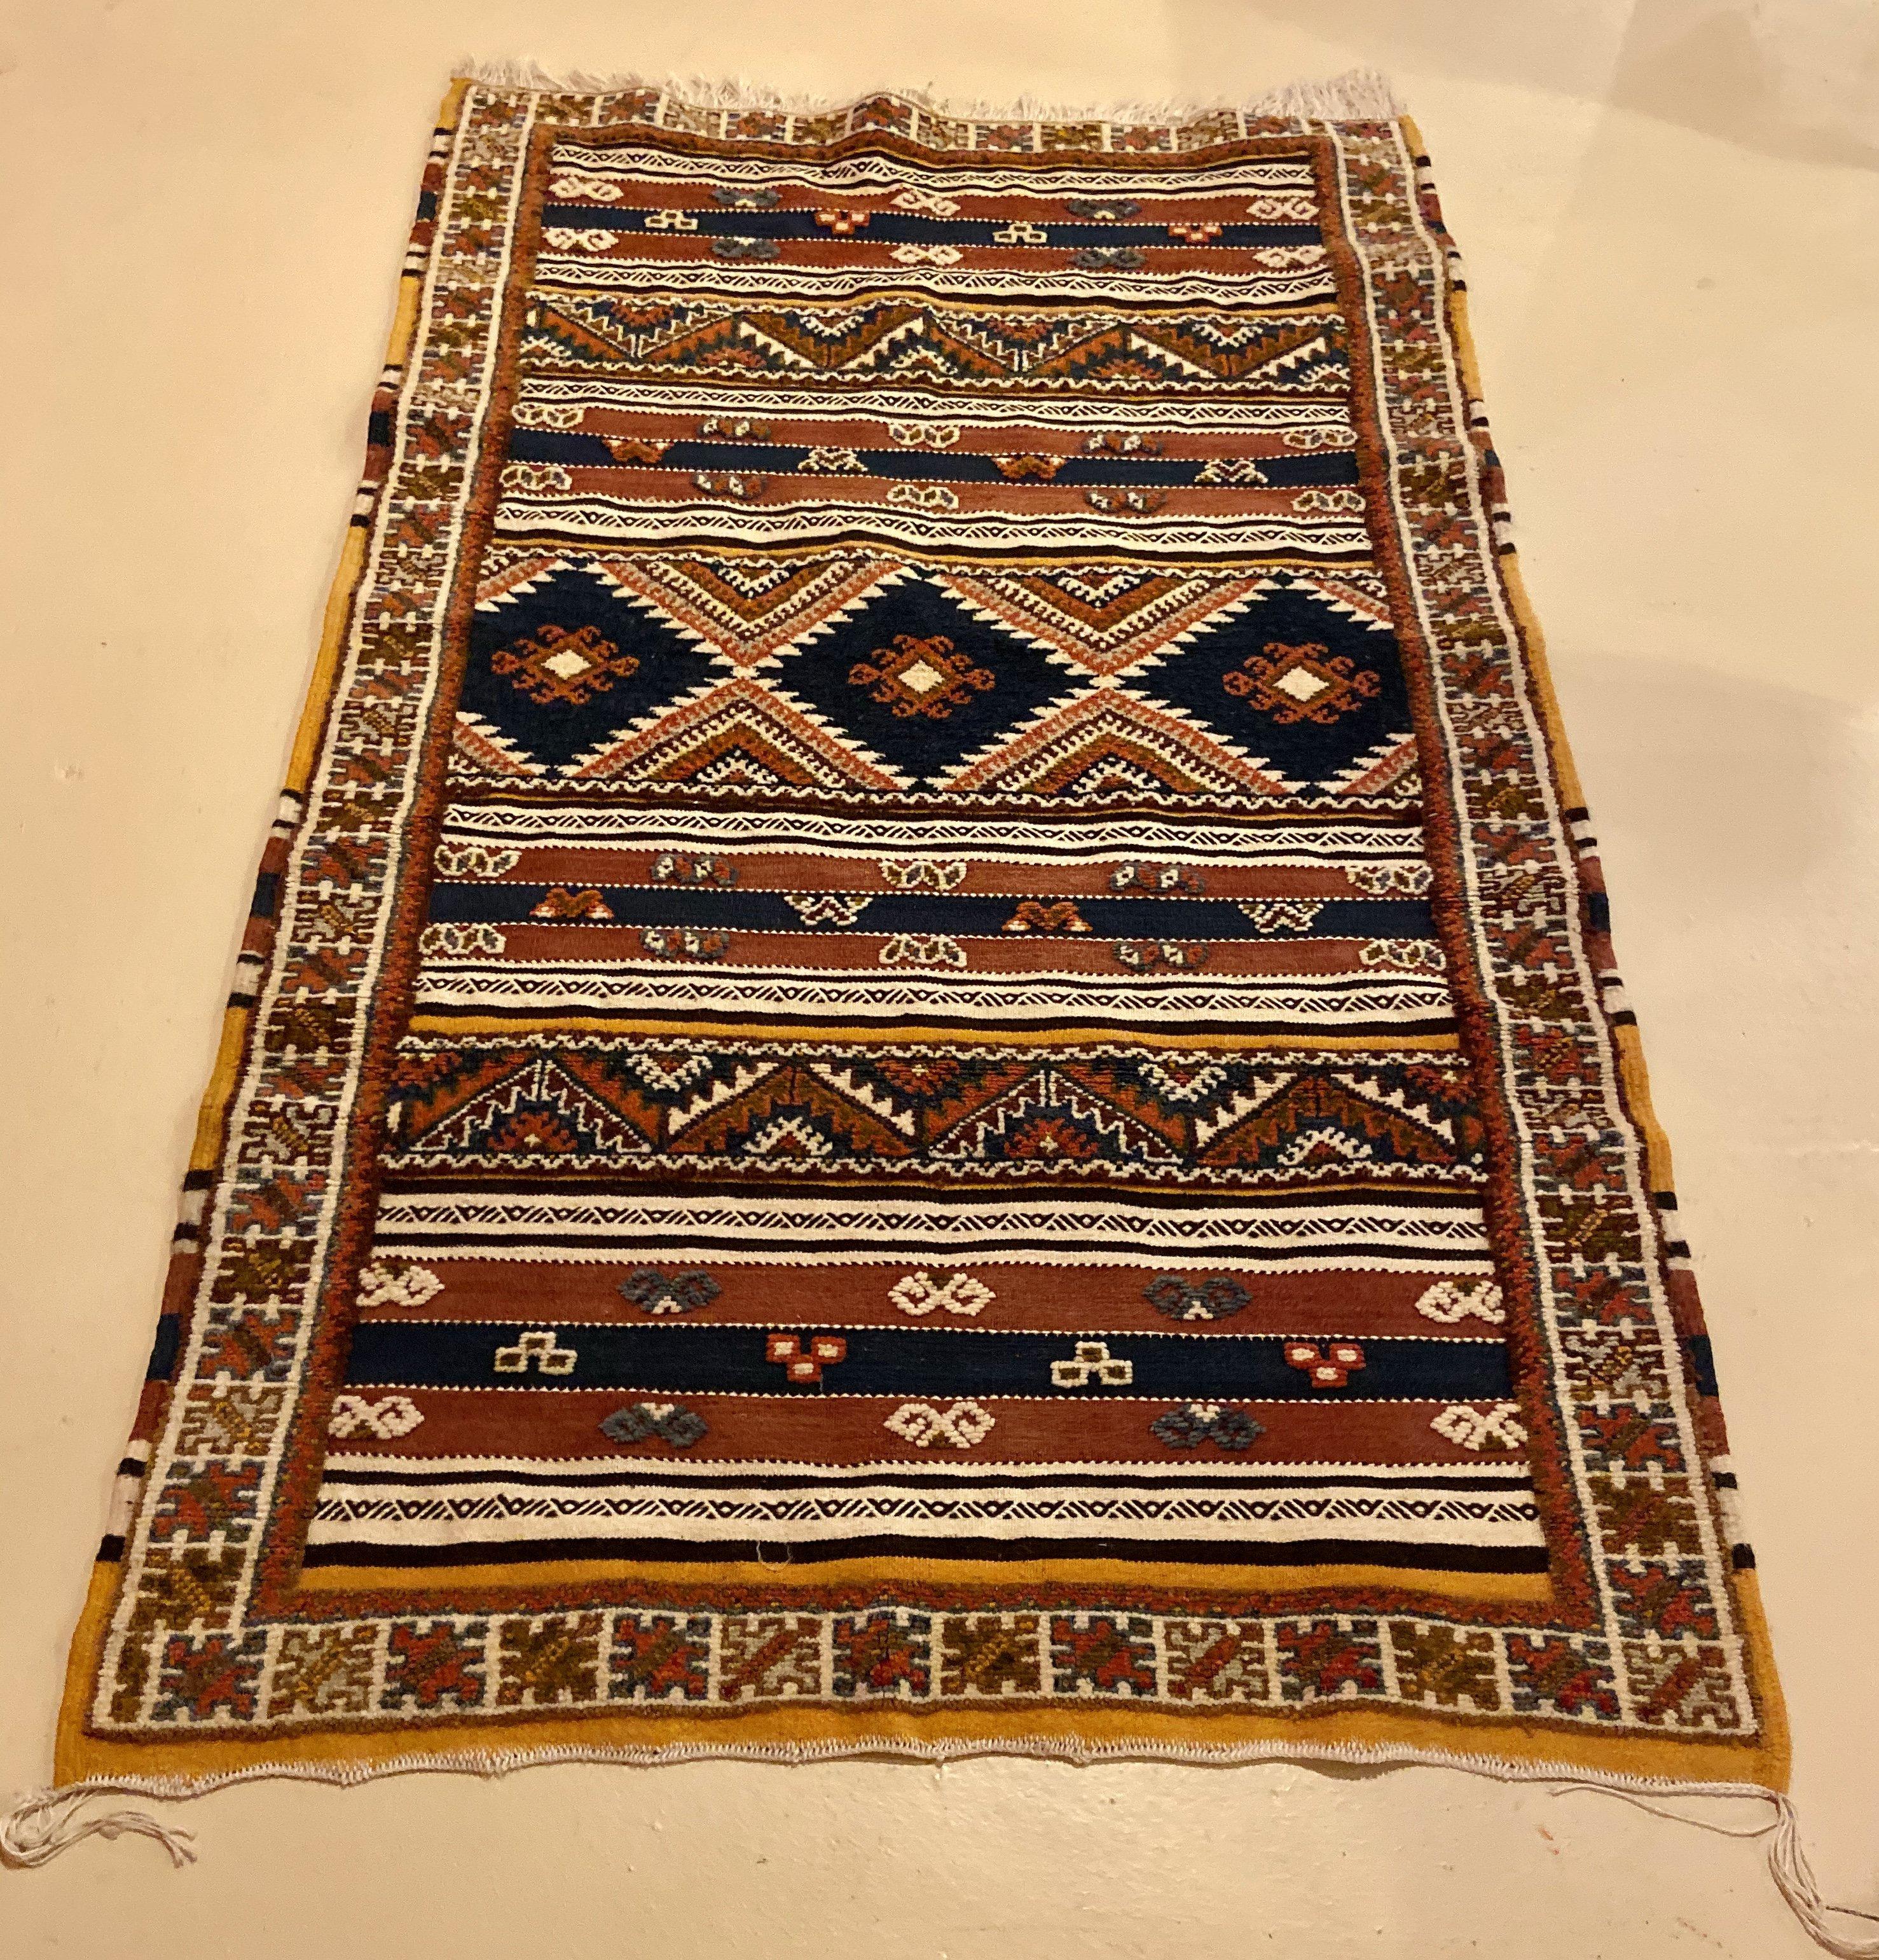 This Moroccan vintage tribal rug or carpet is a stunning and sophisticated addition to your living room, dining room, entryway or bedroom, this rug and its exquisite, captivating pattern will never go out of style. The rug is handwoven carpet from